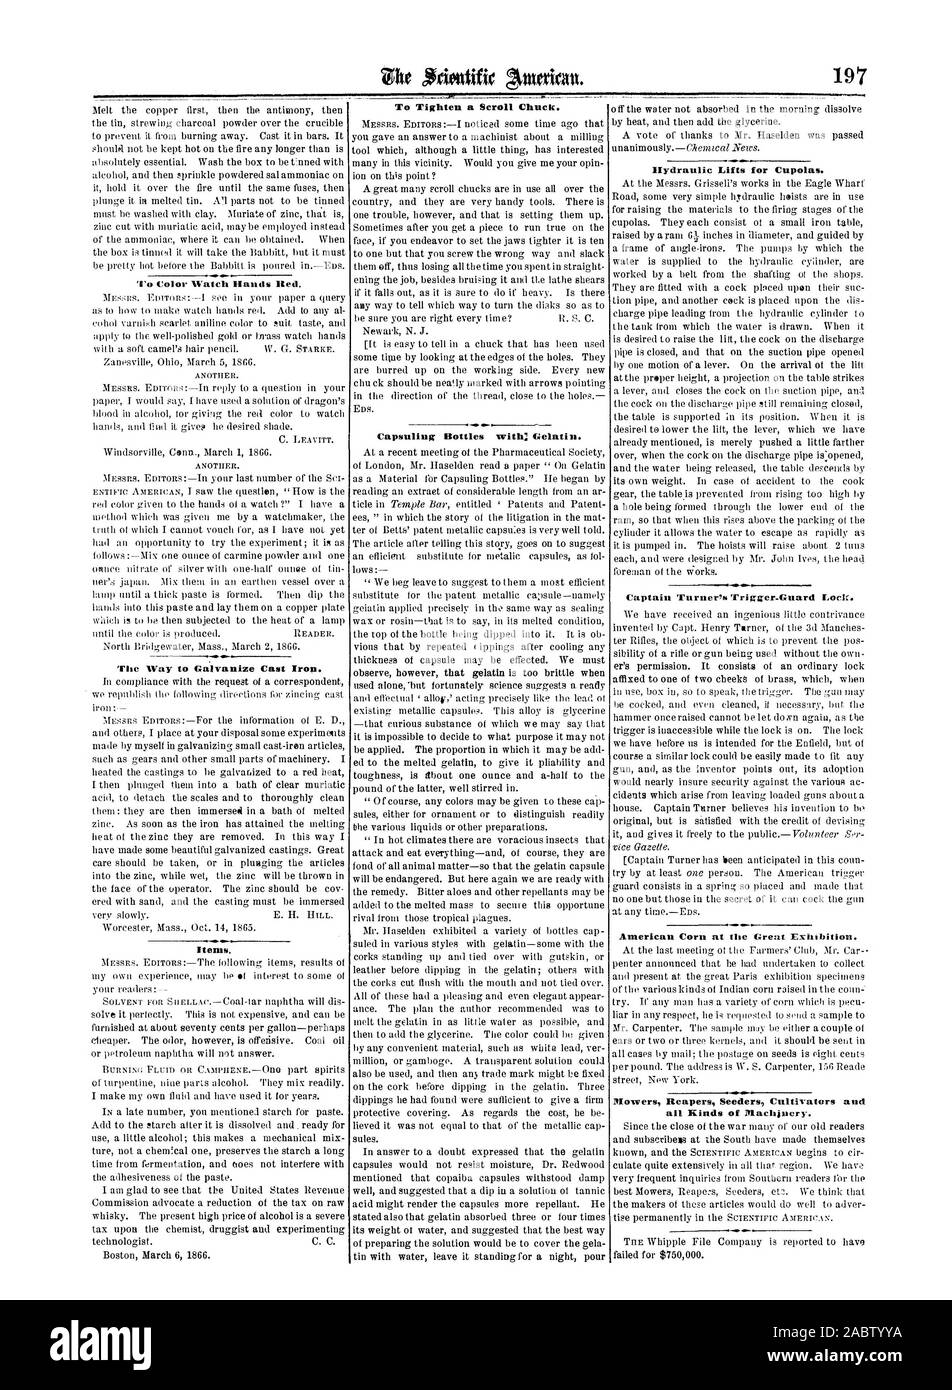 Co Color Watch Hands Bed. The Way to Galvanize Cast Iron. Items. To Tighten a Scroll Chuck. 4 Capsuling Bottles with; Gelatin. Hydraulic Lifts for Cupolas. American Corn at the Great Exhibition. Mowers Reapers Seeders Cultivators and all Kinds of Machinery., scientific american, 1866-03-24 Stock Photo